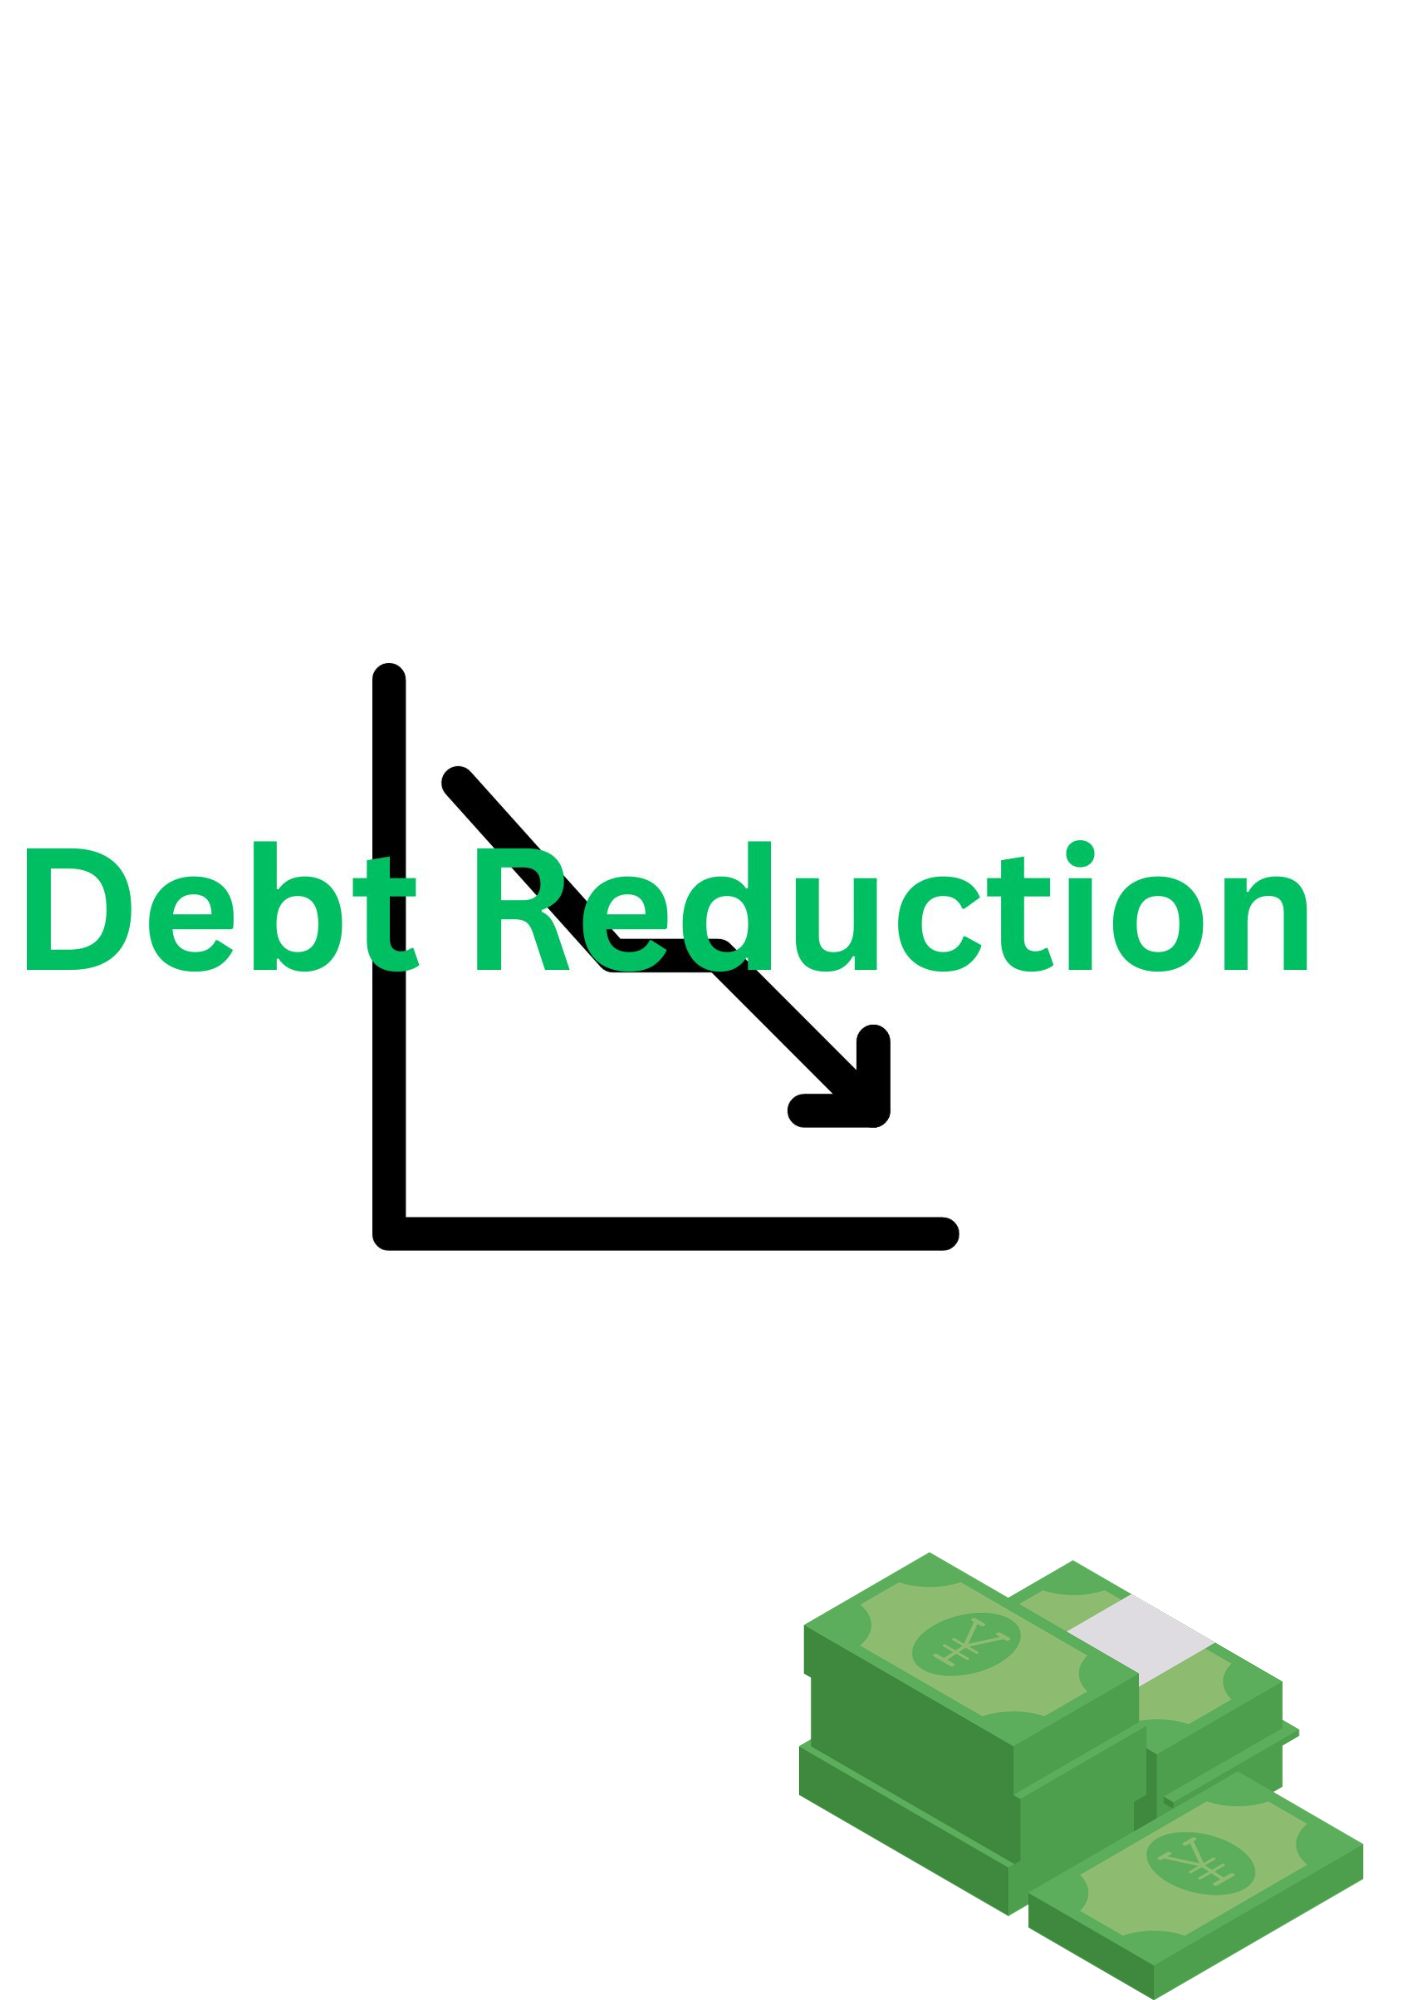 Debt Reduction themed banner